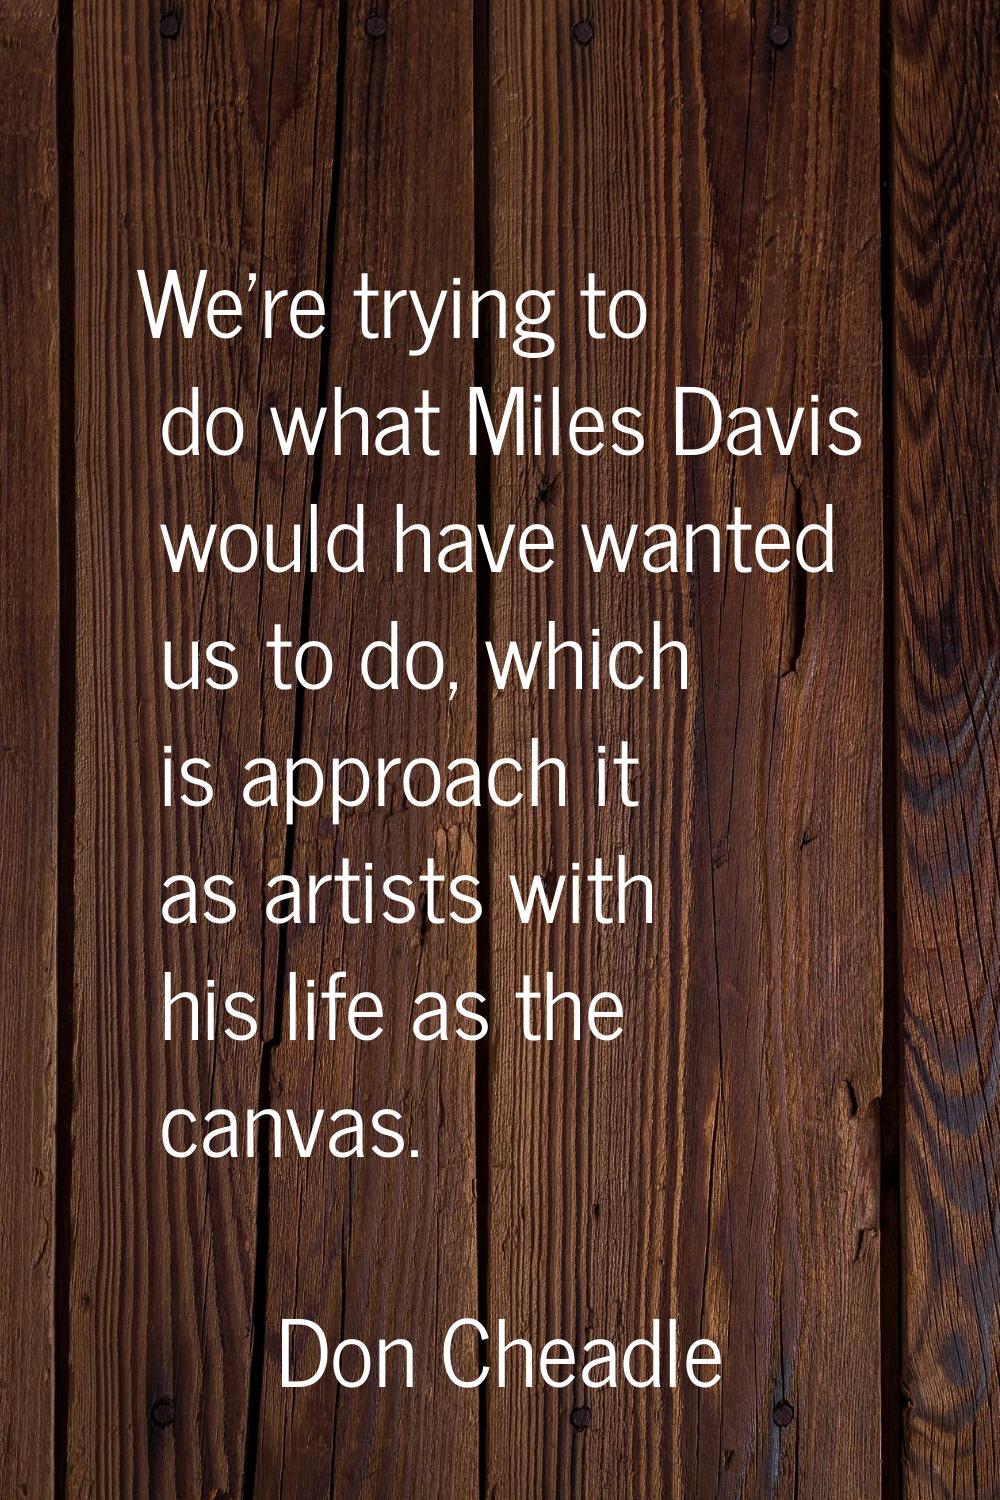 We're trying to do what Miles Davis would have wanted us to do, which is approach it as artists wit